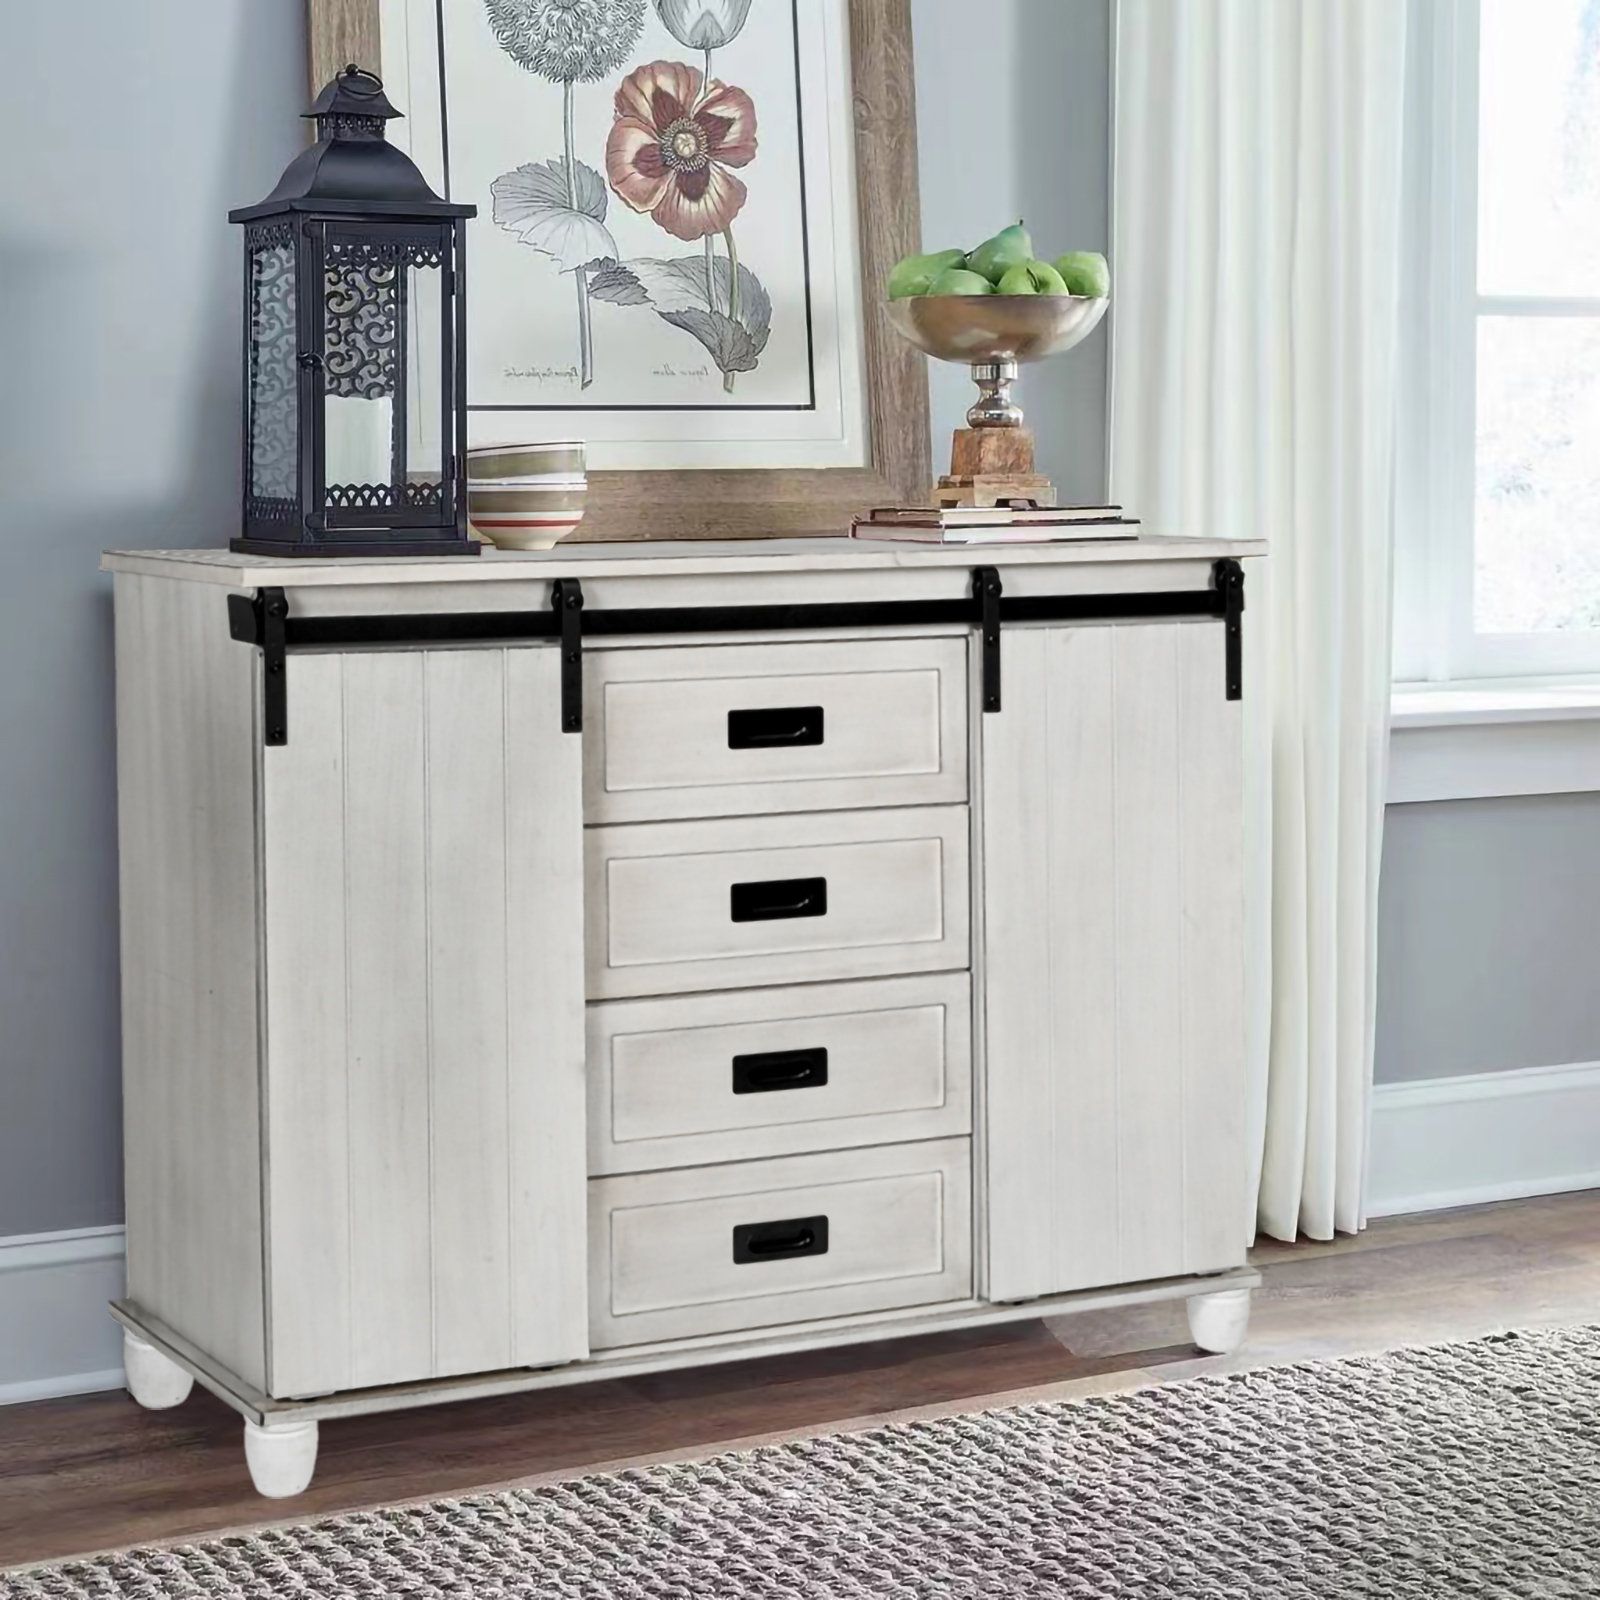 Gracie Oaks Redgate 45" Wide White Storage Cabinet Sideboard With 4 Drawers  And 2 Sliding Barn Doors & Reviews | Wayfair In Sideboards Double Barn Door Buffet (Gallery 7 of 20)